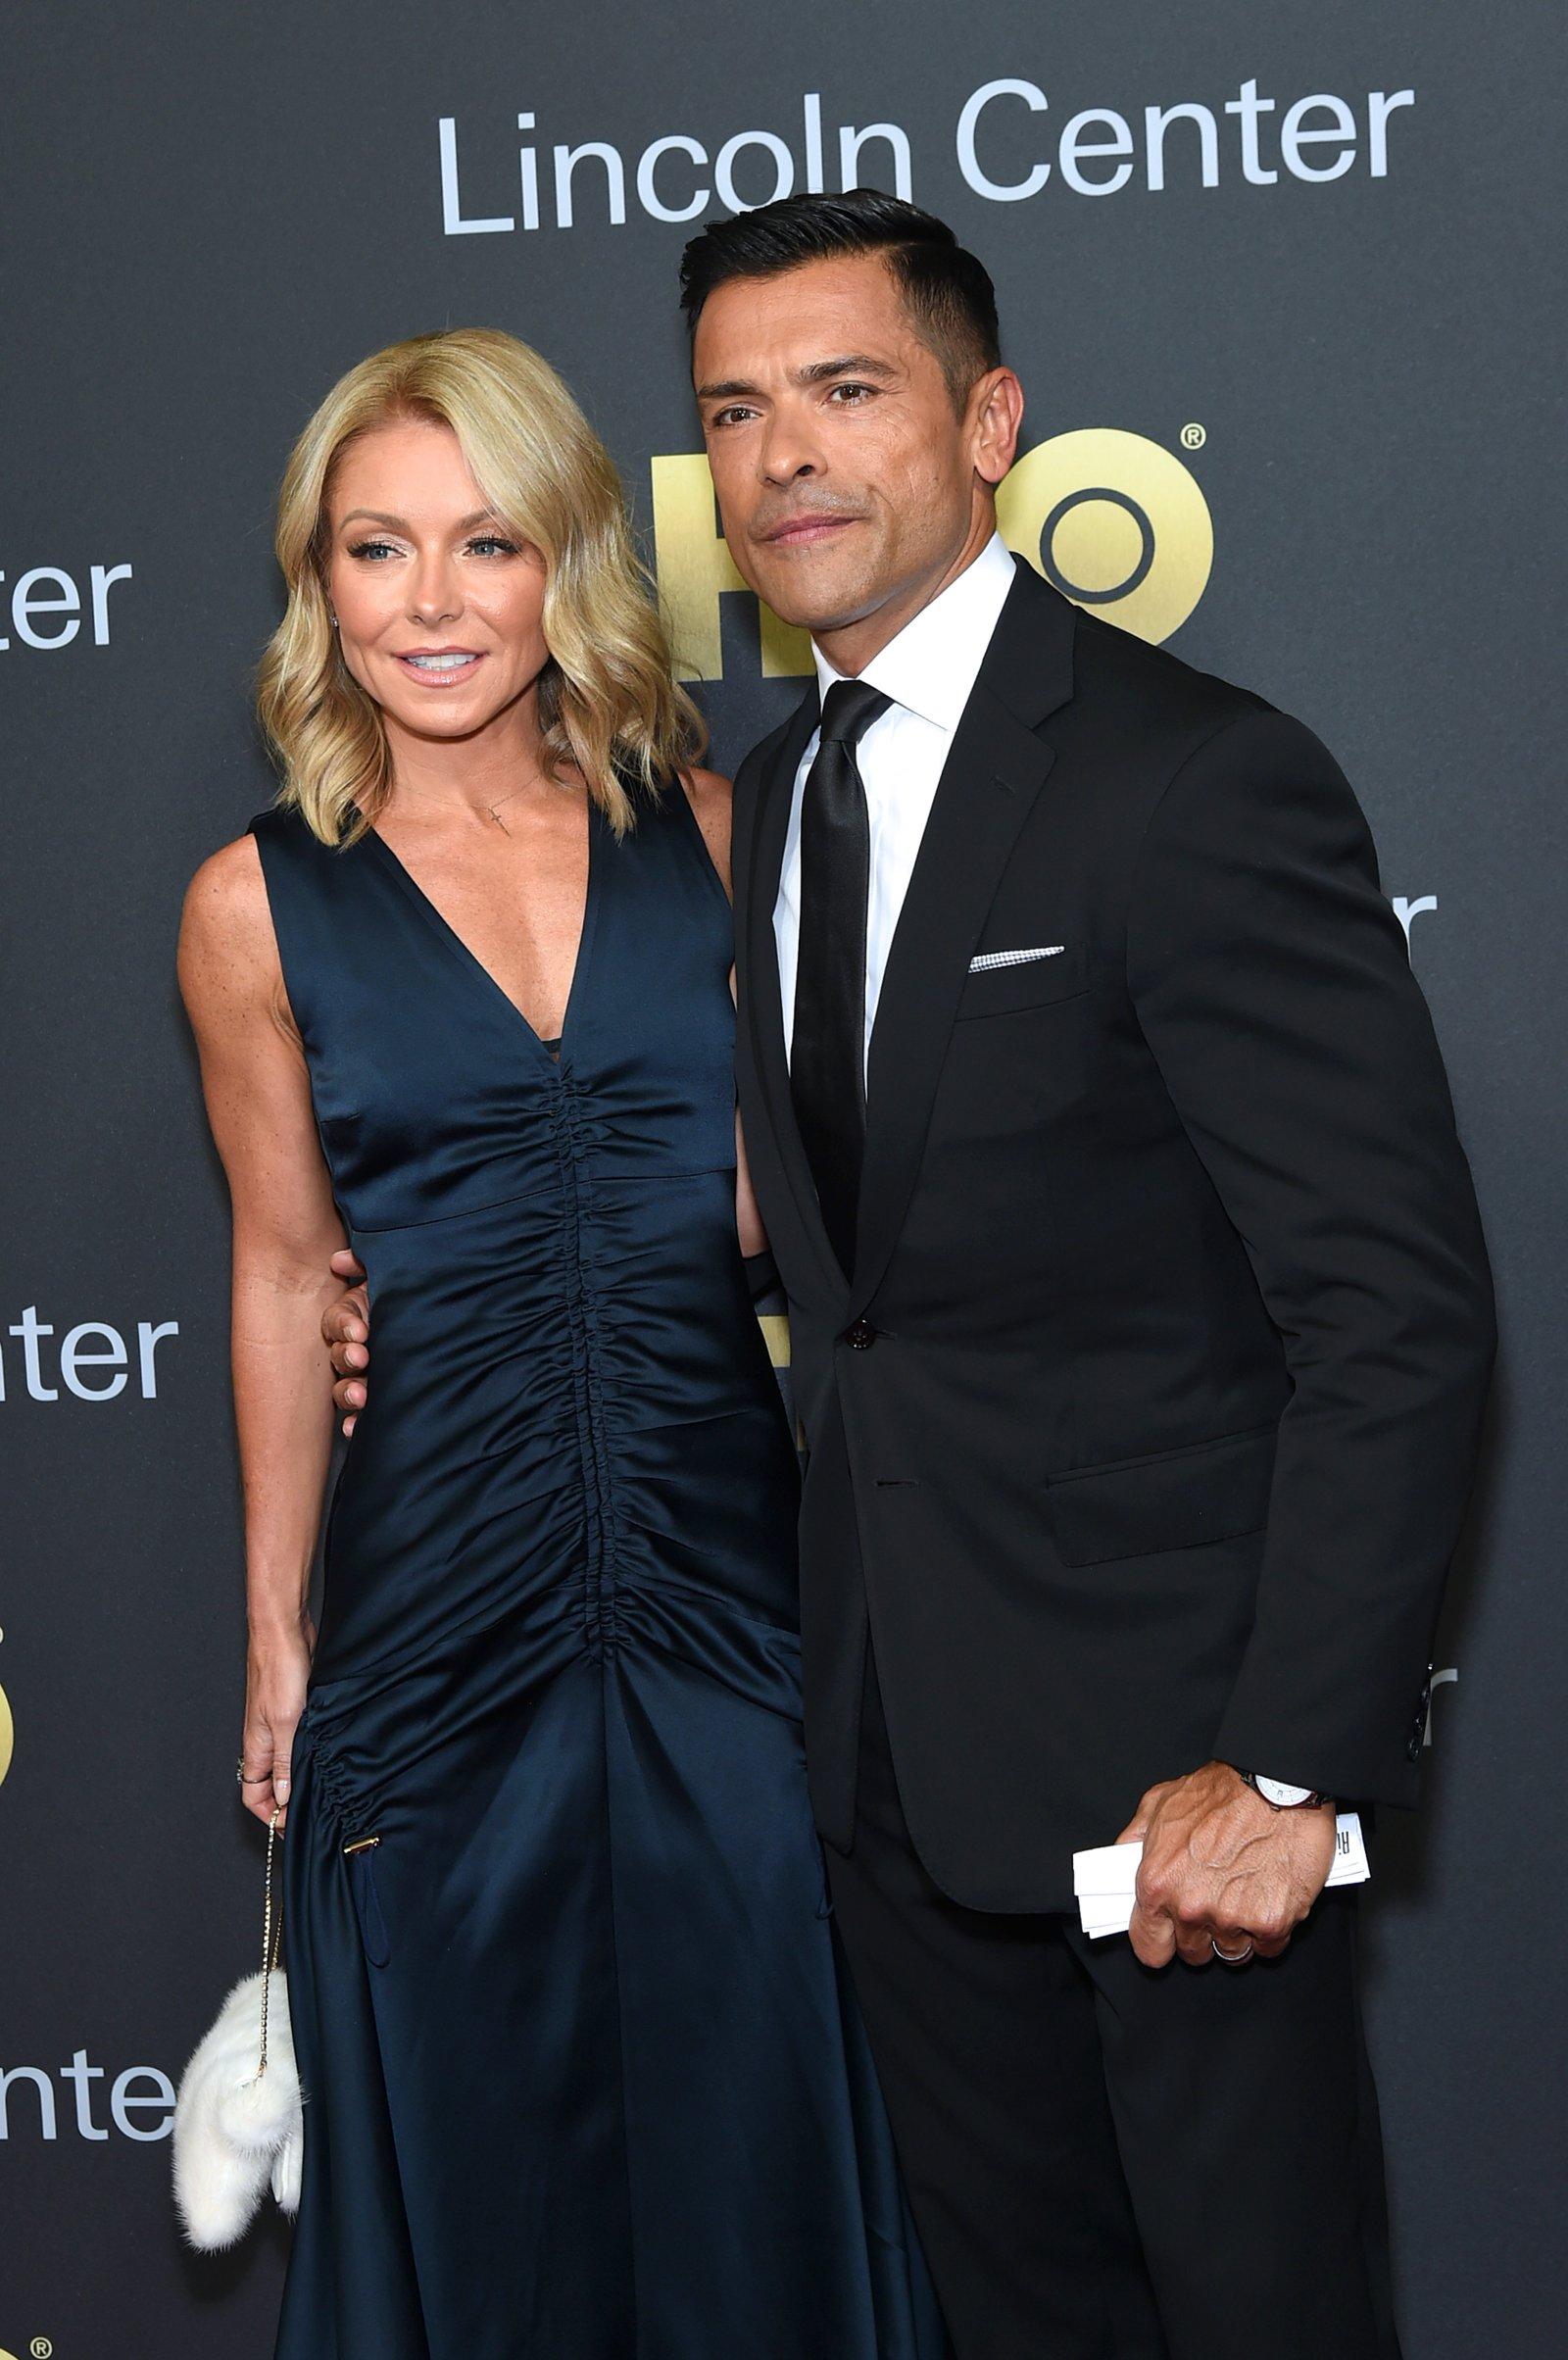 Kelly Ripa Unimpressed Filming Husband's 'Side Of The Bed'